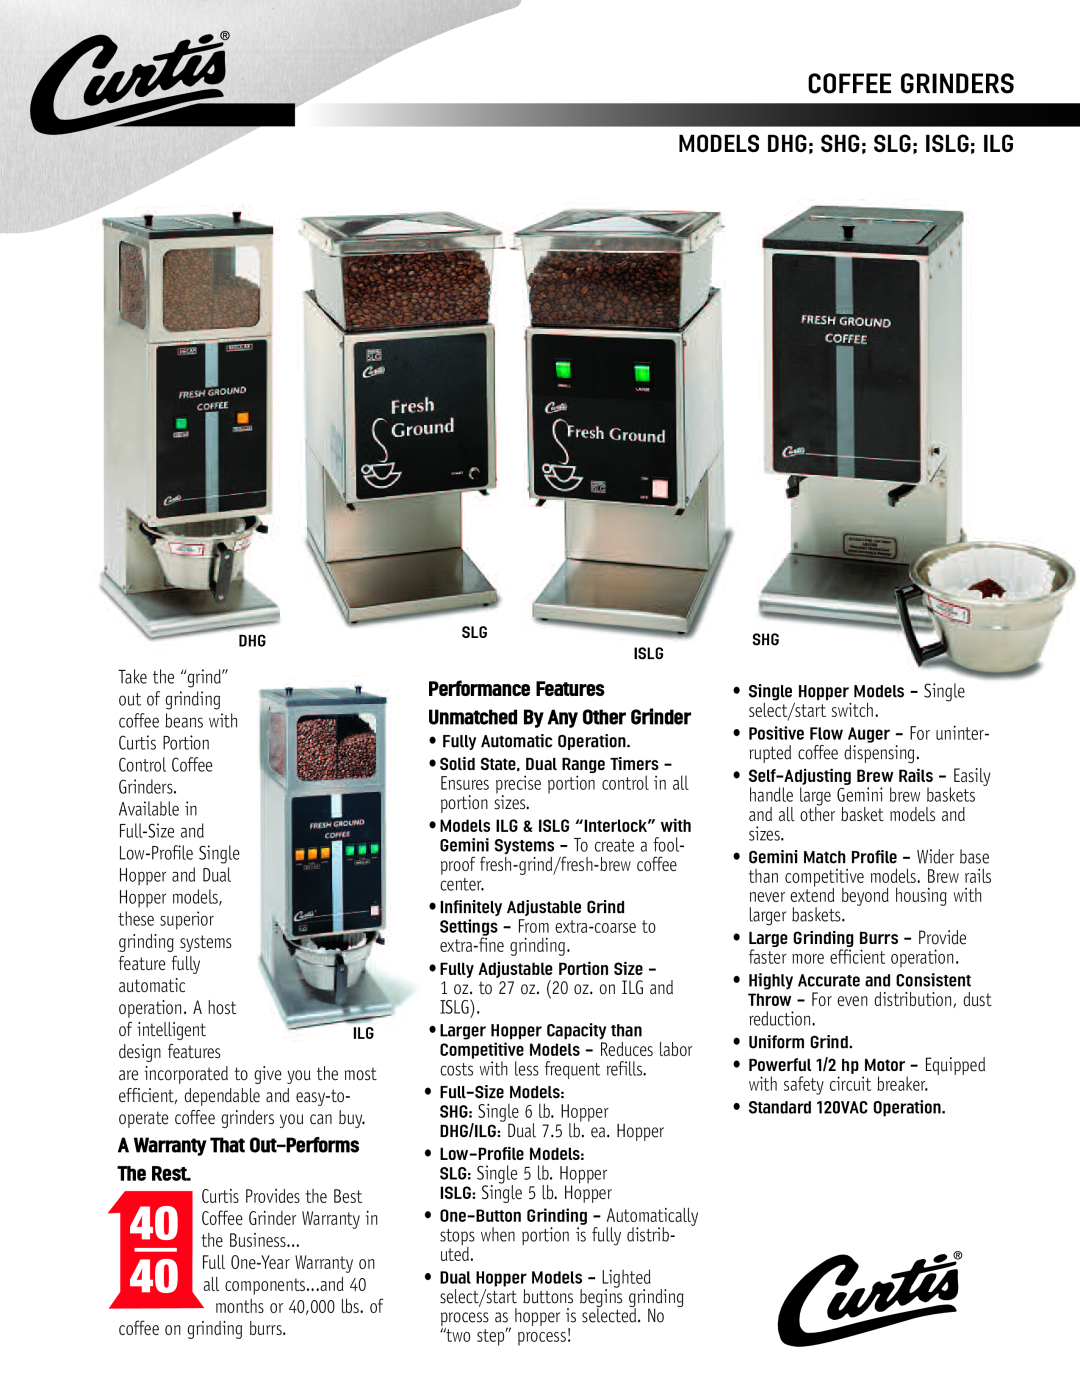 Wibur Curtis Company DHG, ILG warranty Coffee Grinders, Models Dhg Shg Slg Islg Ilg, A Warranty That Out-PerformsThe Rest 